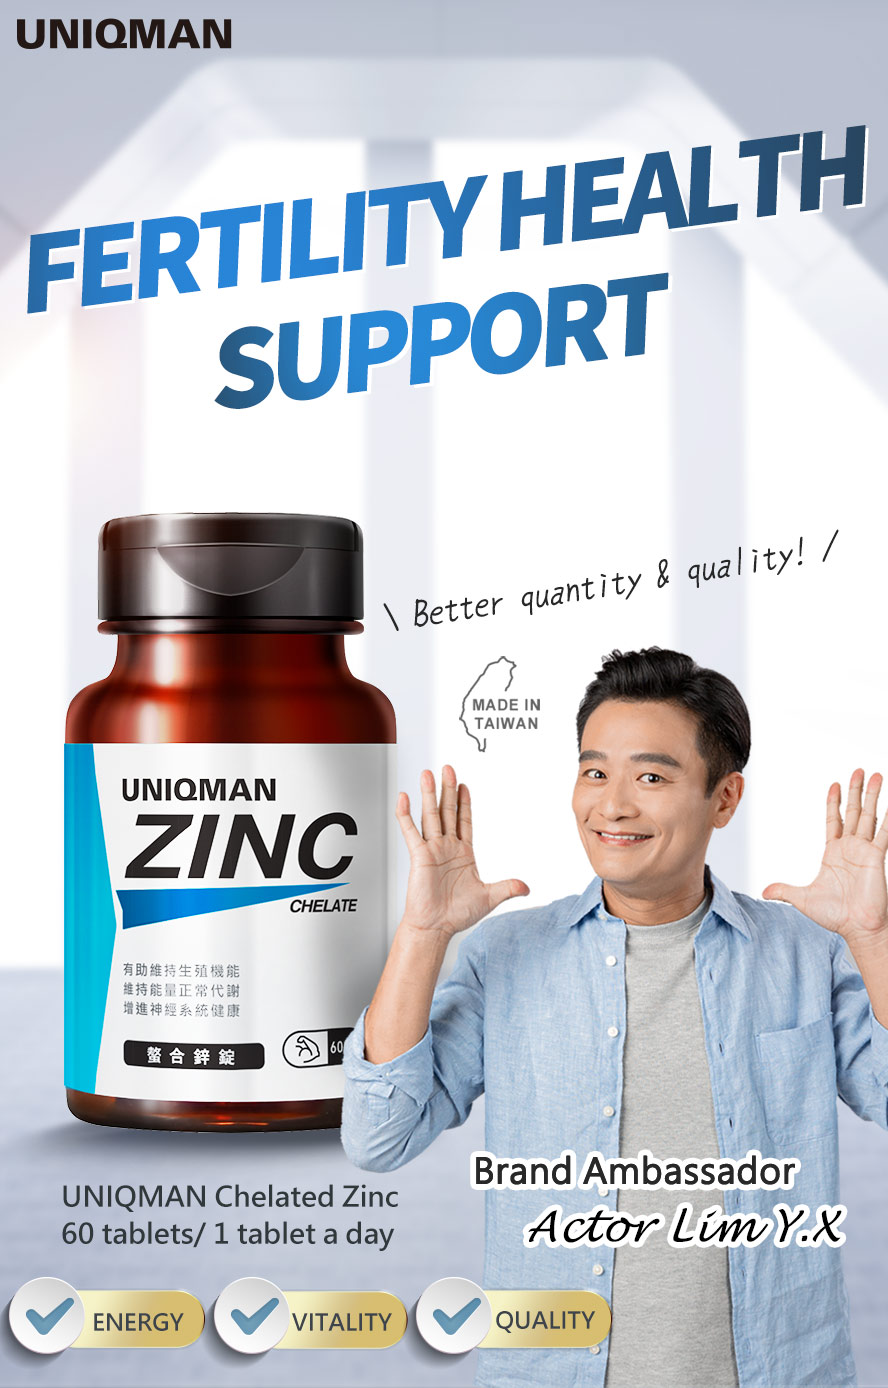 UNIQMAN Chelated Zinc supports men's reproductive health, improve seeds quality and vitality.